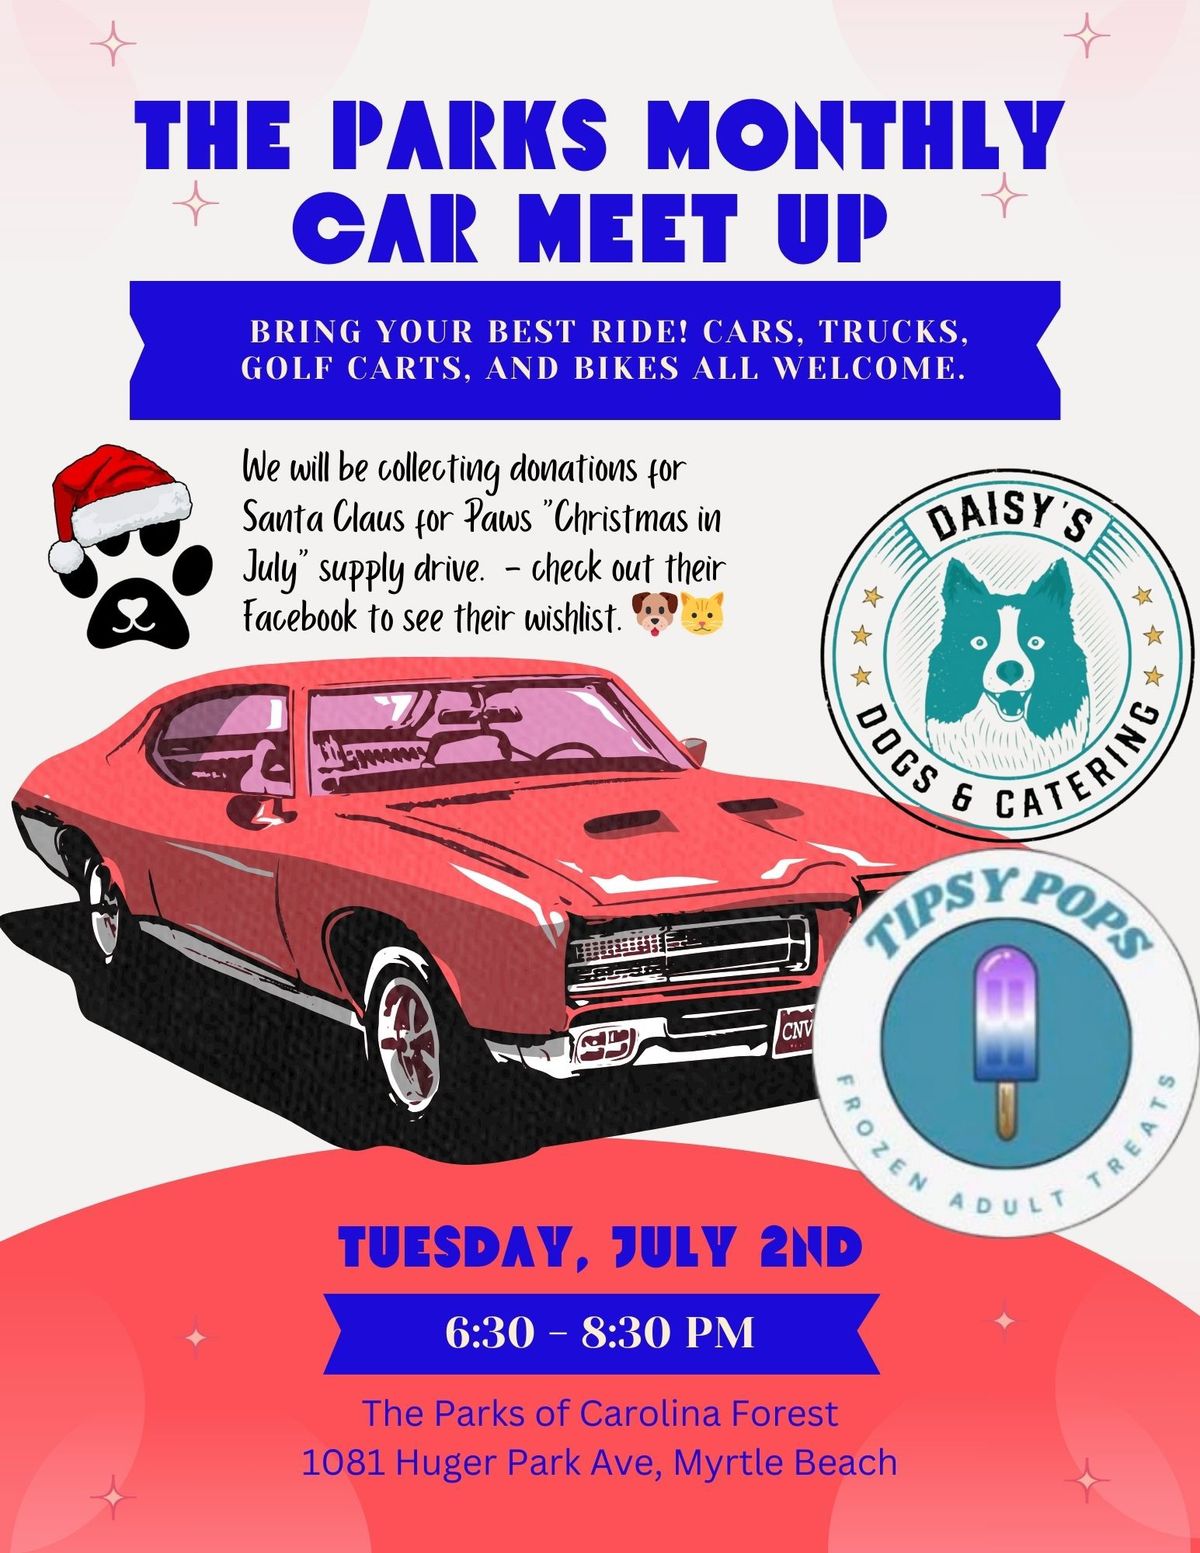 The Parks Monthly Car Meet Up